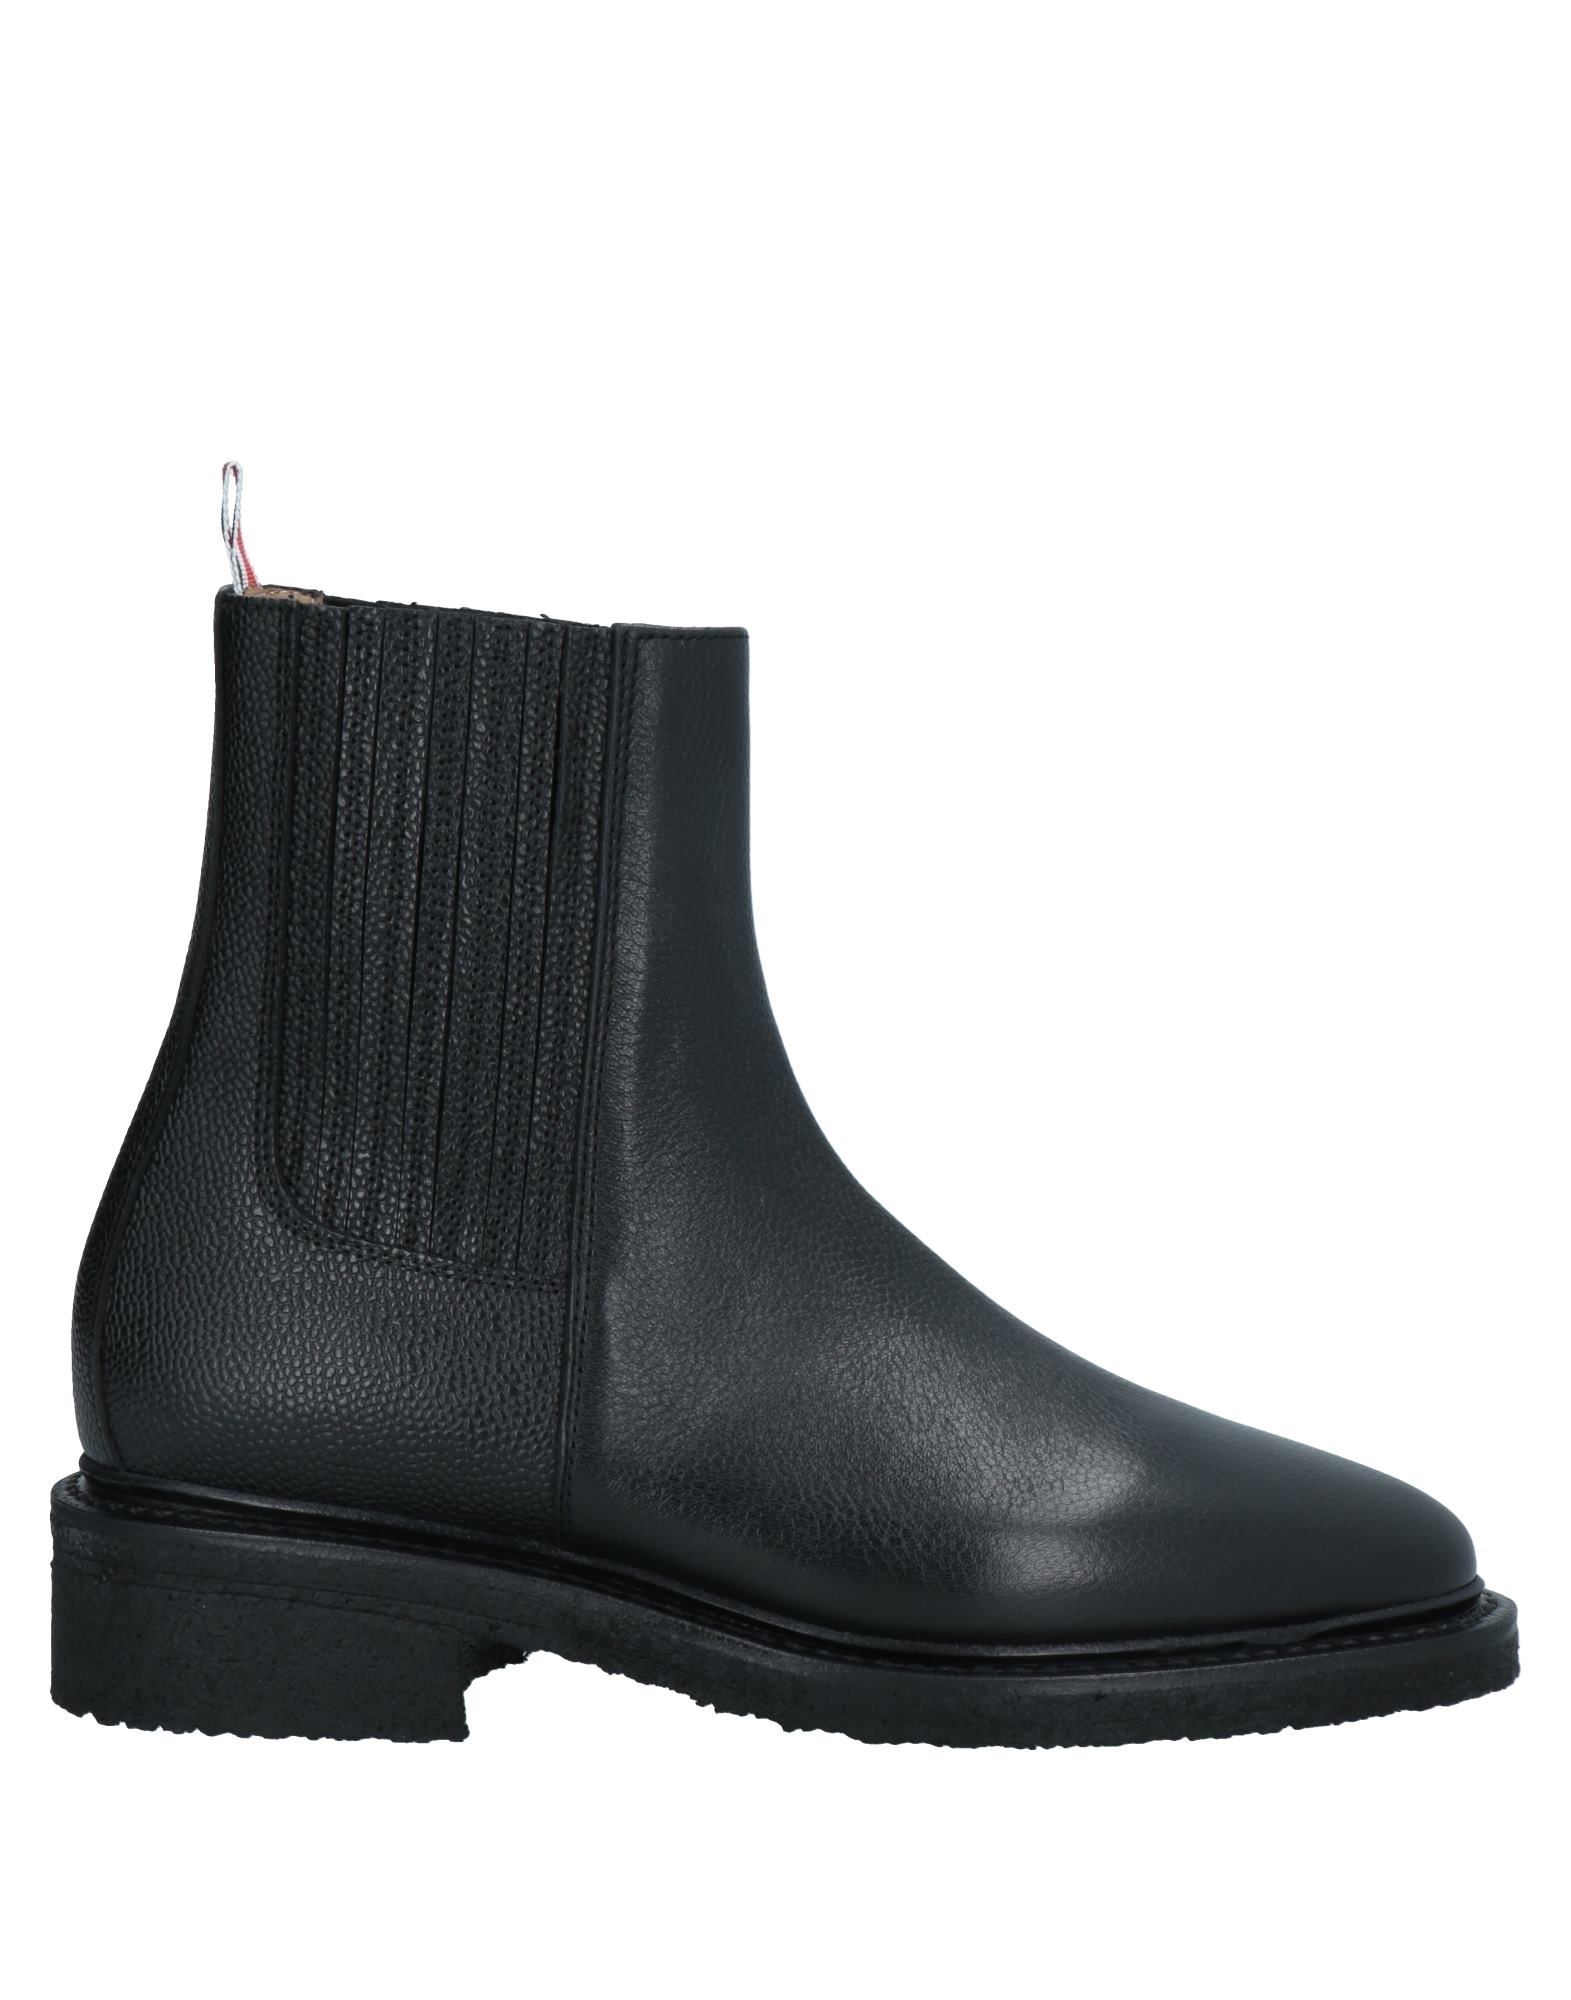 Shop Thom Browne Woman Ankle Boots Black Size 11 Soft Leather